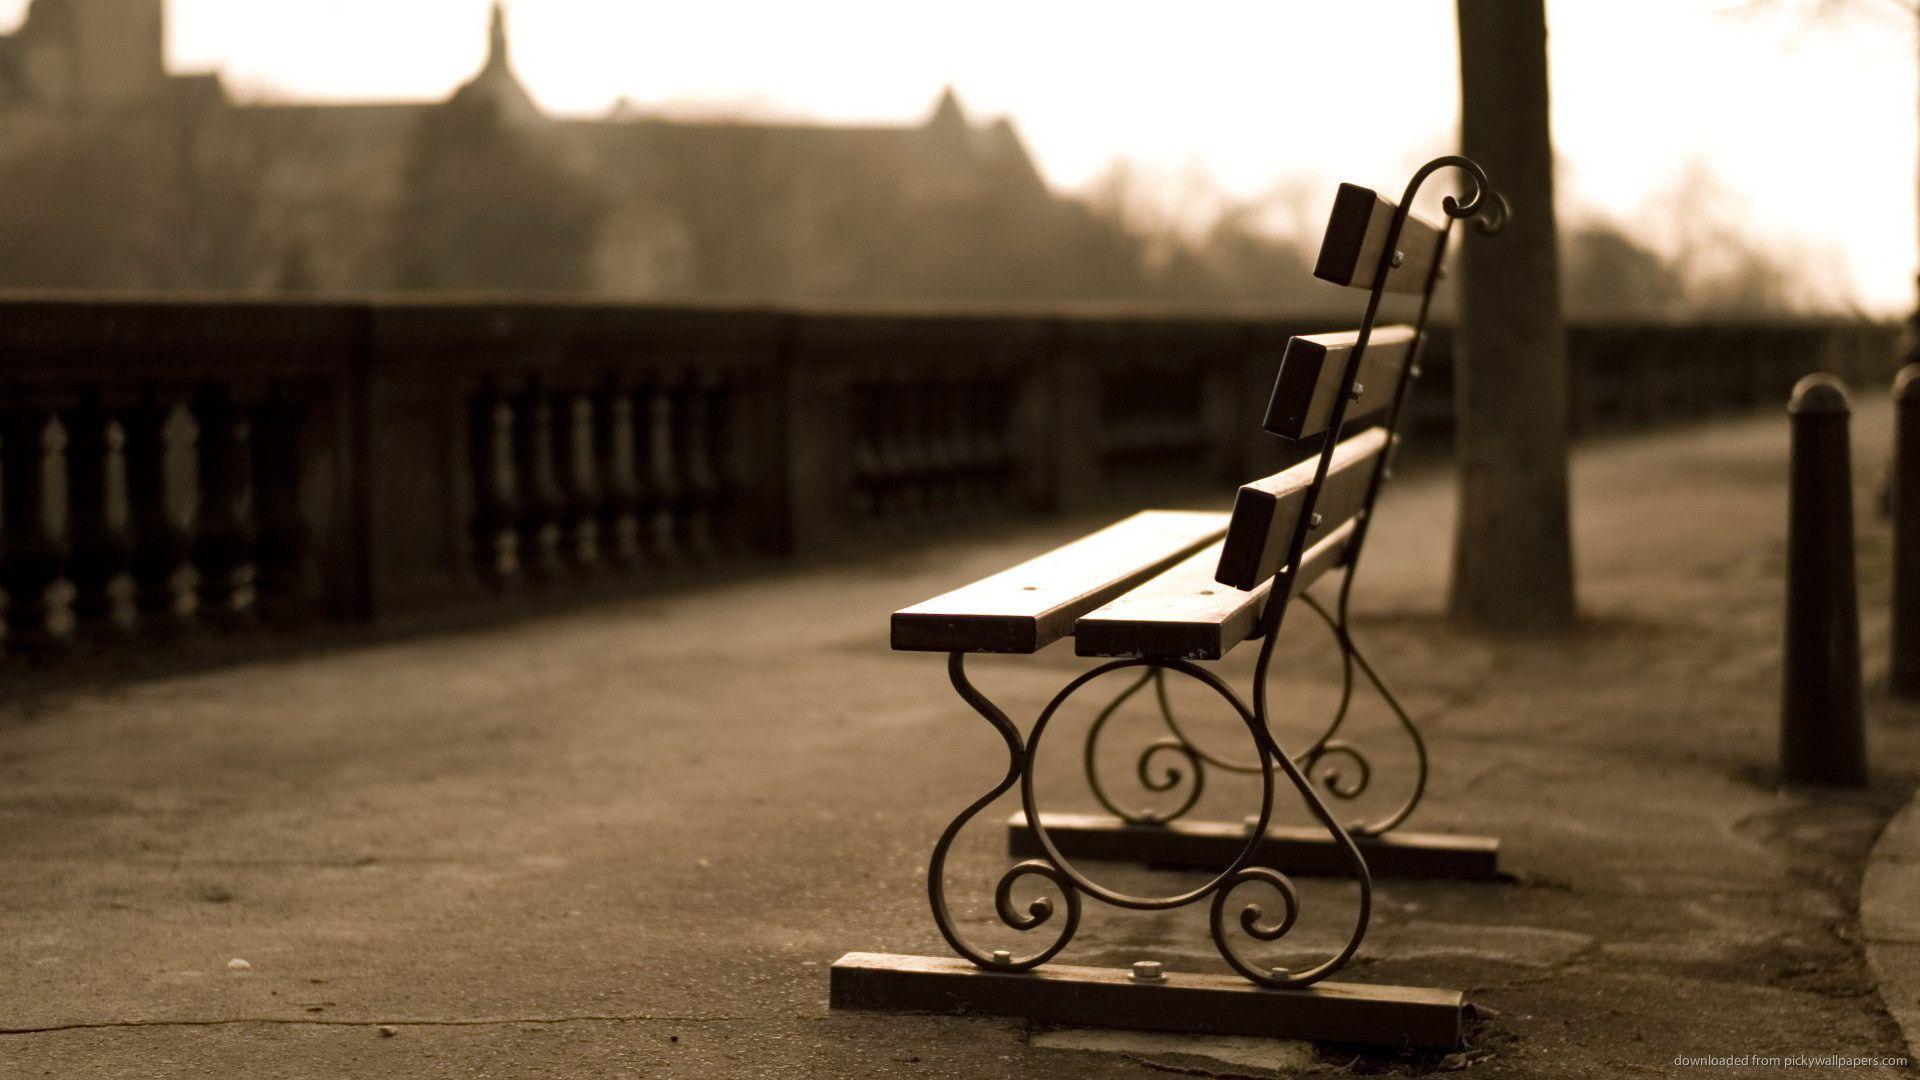 Fancy Bench In Sepia Wallpaper For Samsung Galaxy Tab